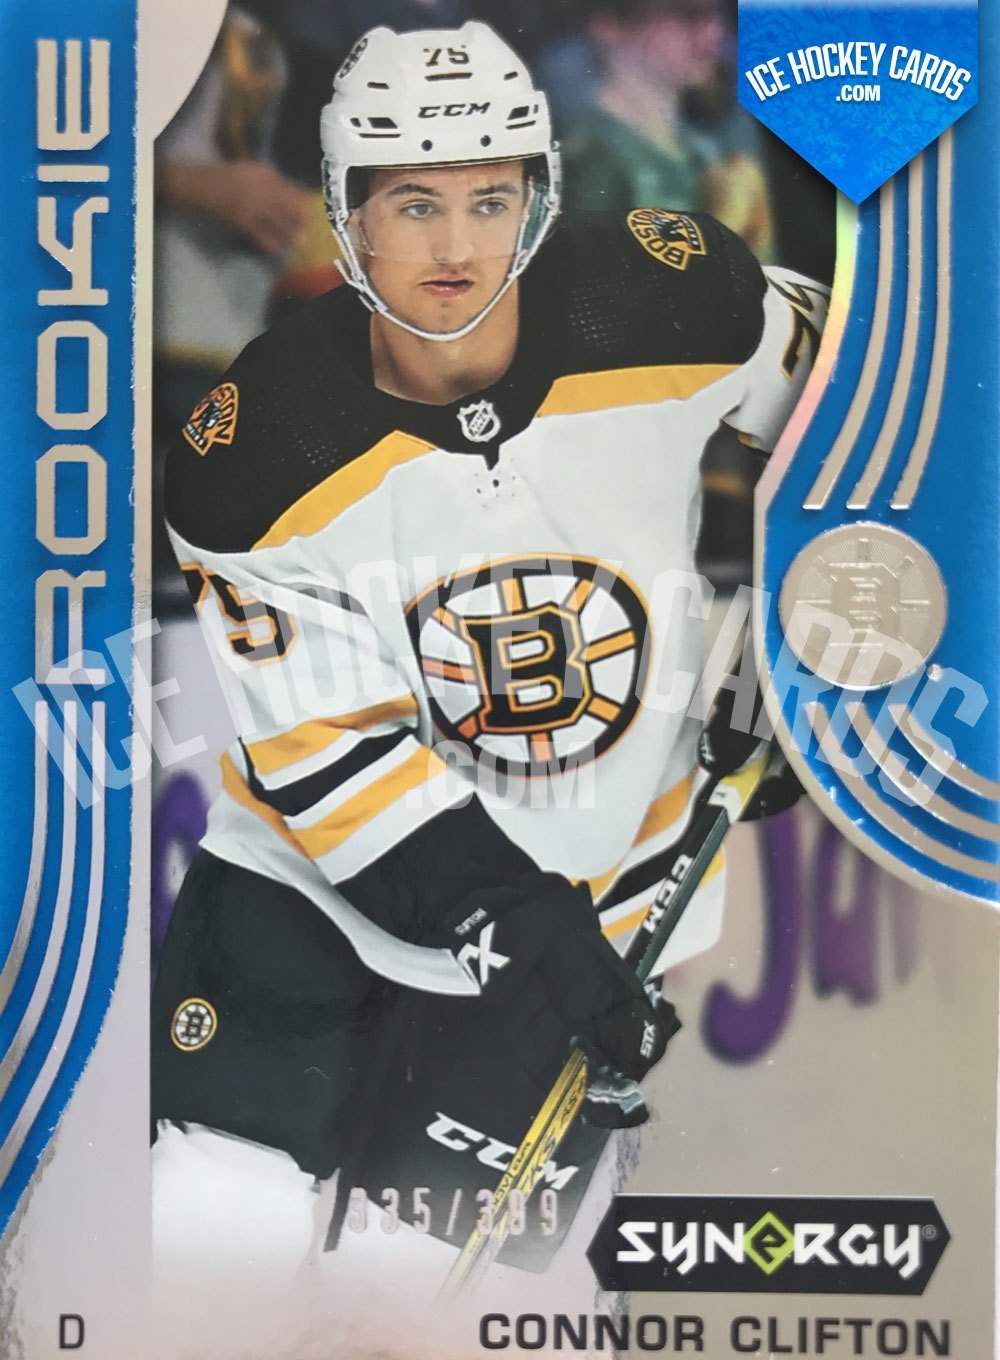 Upper Deck - Synergy 19-20 - Connor Clifton Rookie Card Blue